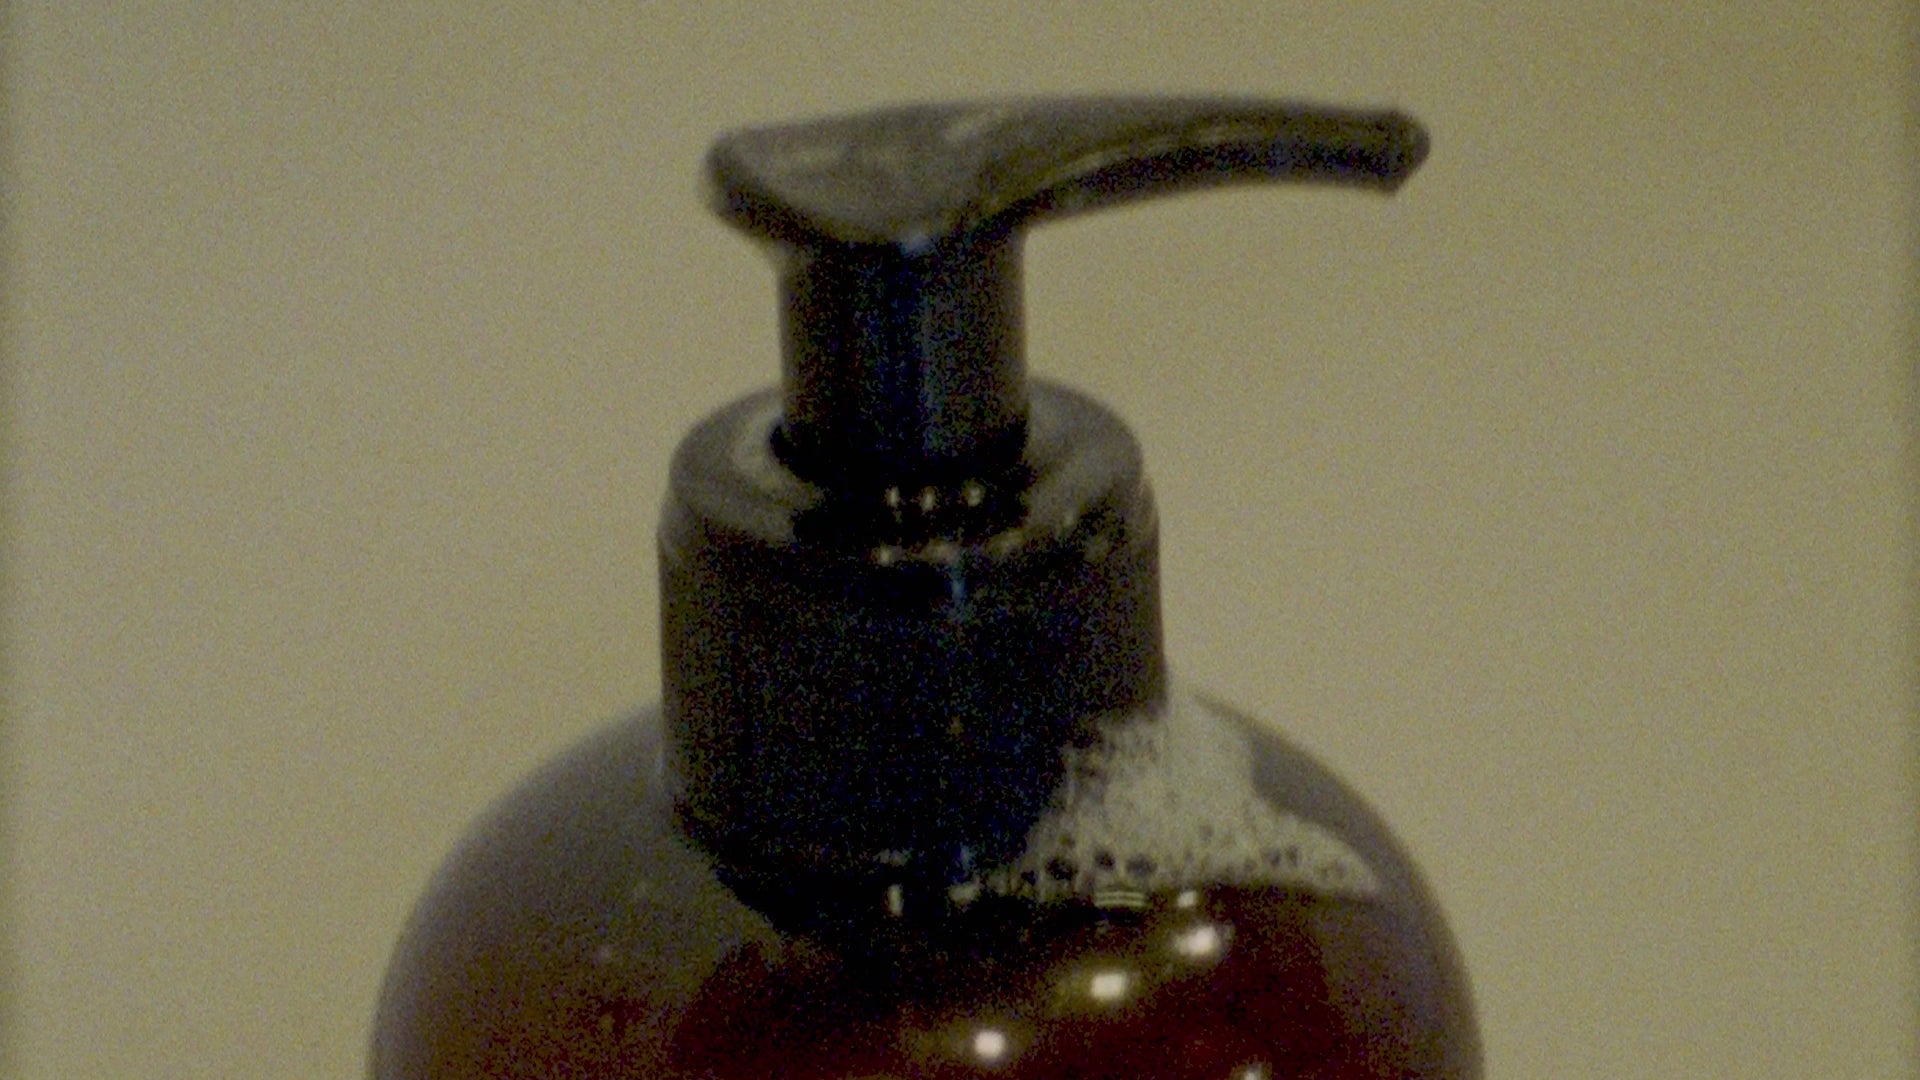 Load video: &lt;p&gt;&lt;span class=&quot;metafield-multi_line_text_field&quot;&gt;Work up a rich lather in wet hands and massage hands and/or body thoroughly before rinsing off with water.&lt;/span&gt;&lt;/p&gt;